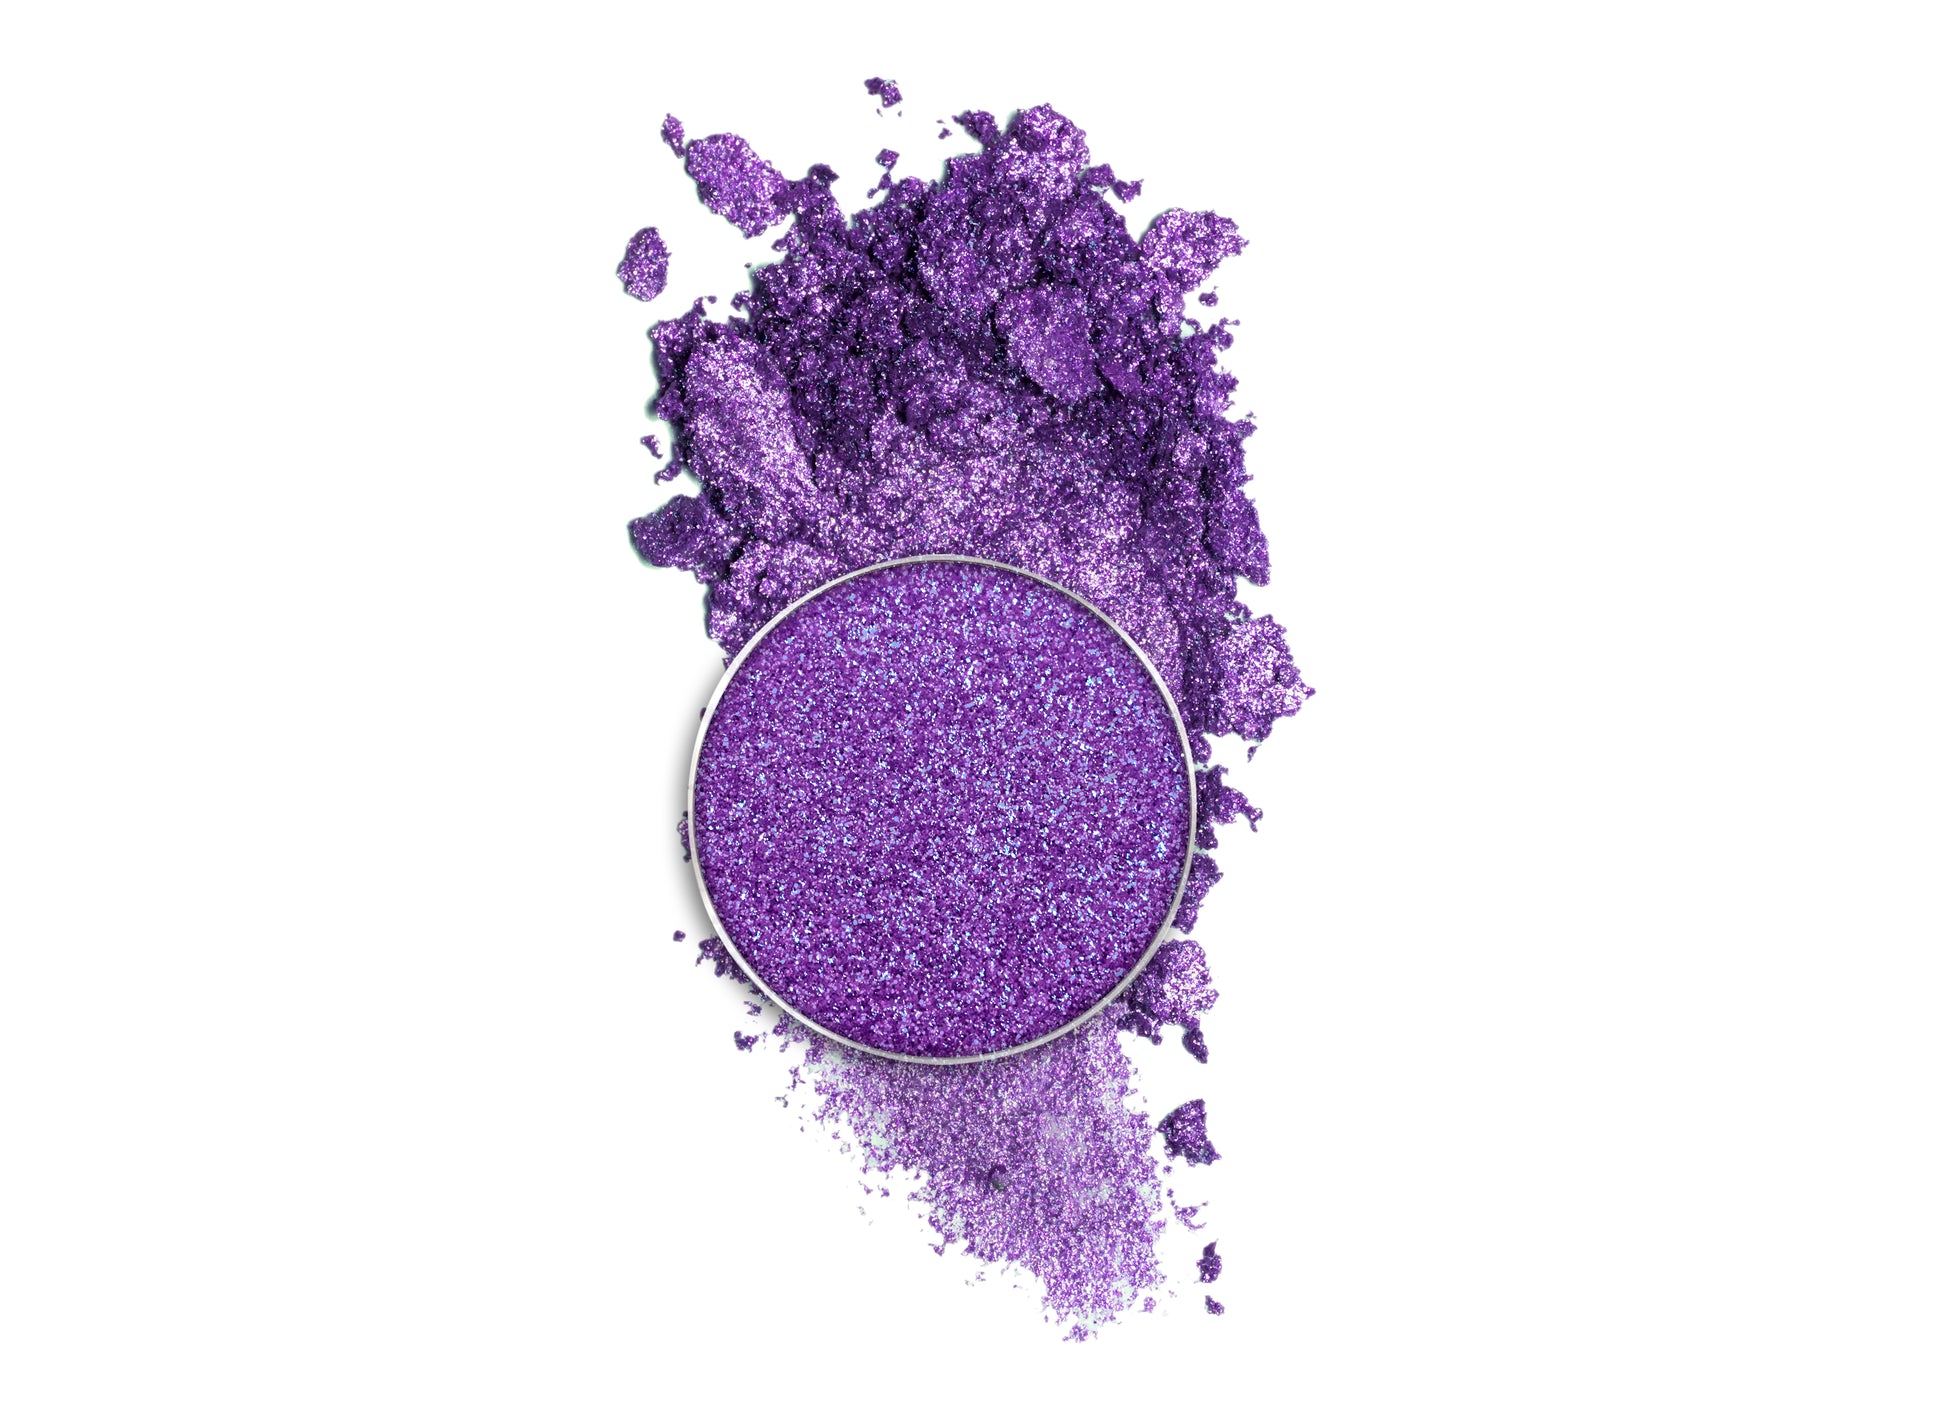 WHAT A DIVA Purple duo chrome eyeshadow with baby blue sparkles